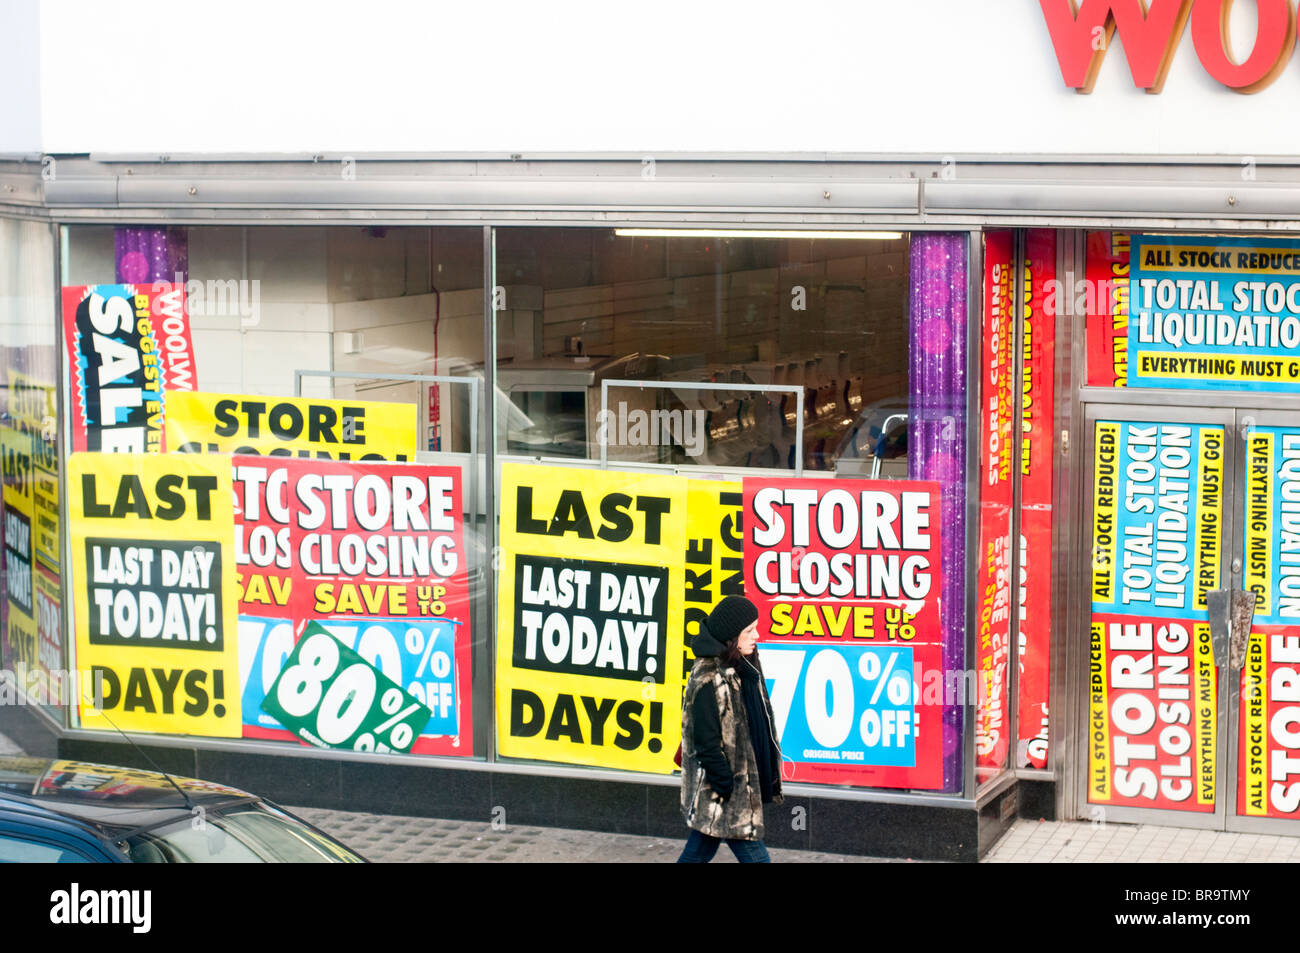 Retail shop WOOLWORTHS going out of business closing down. Heavy discount signs on window display Last days 80% off Stock Photo